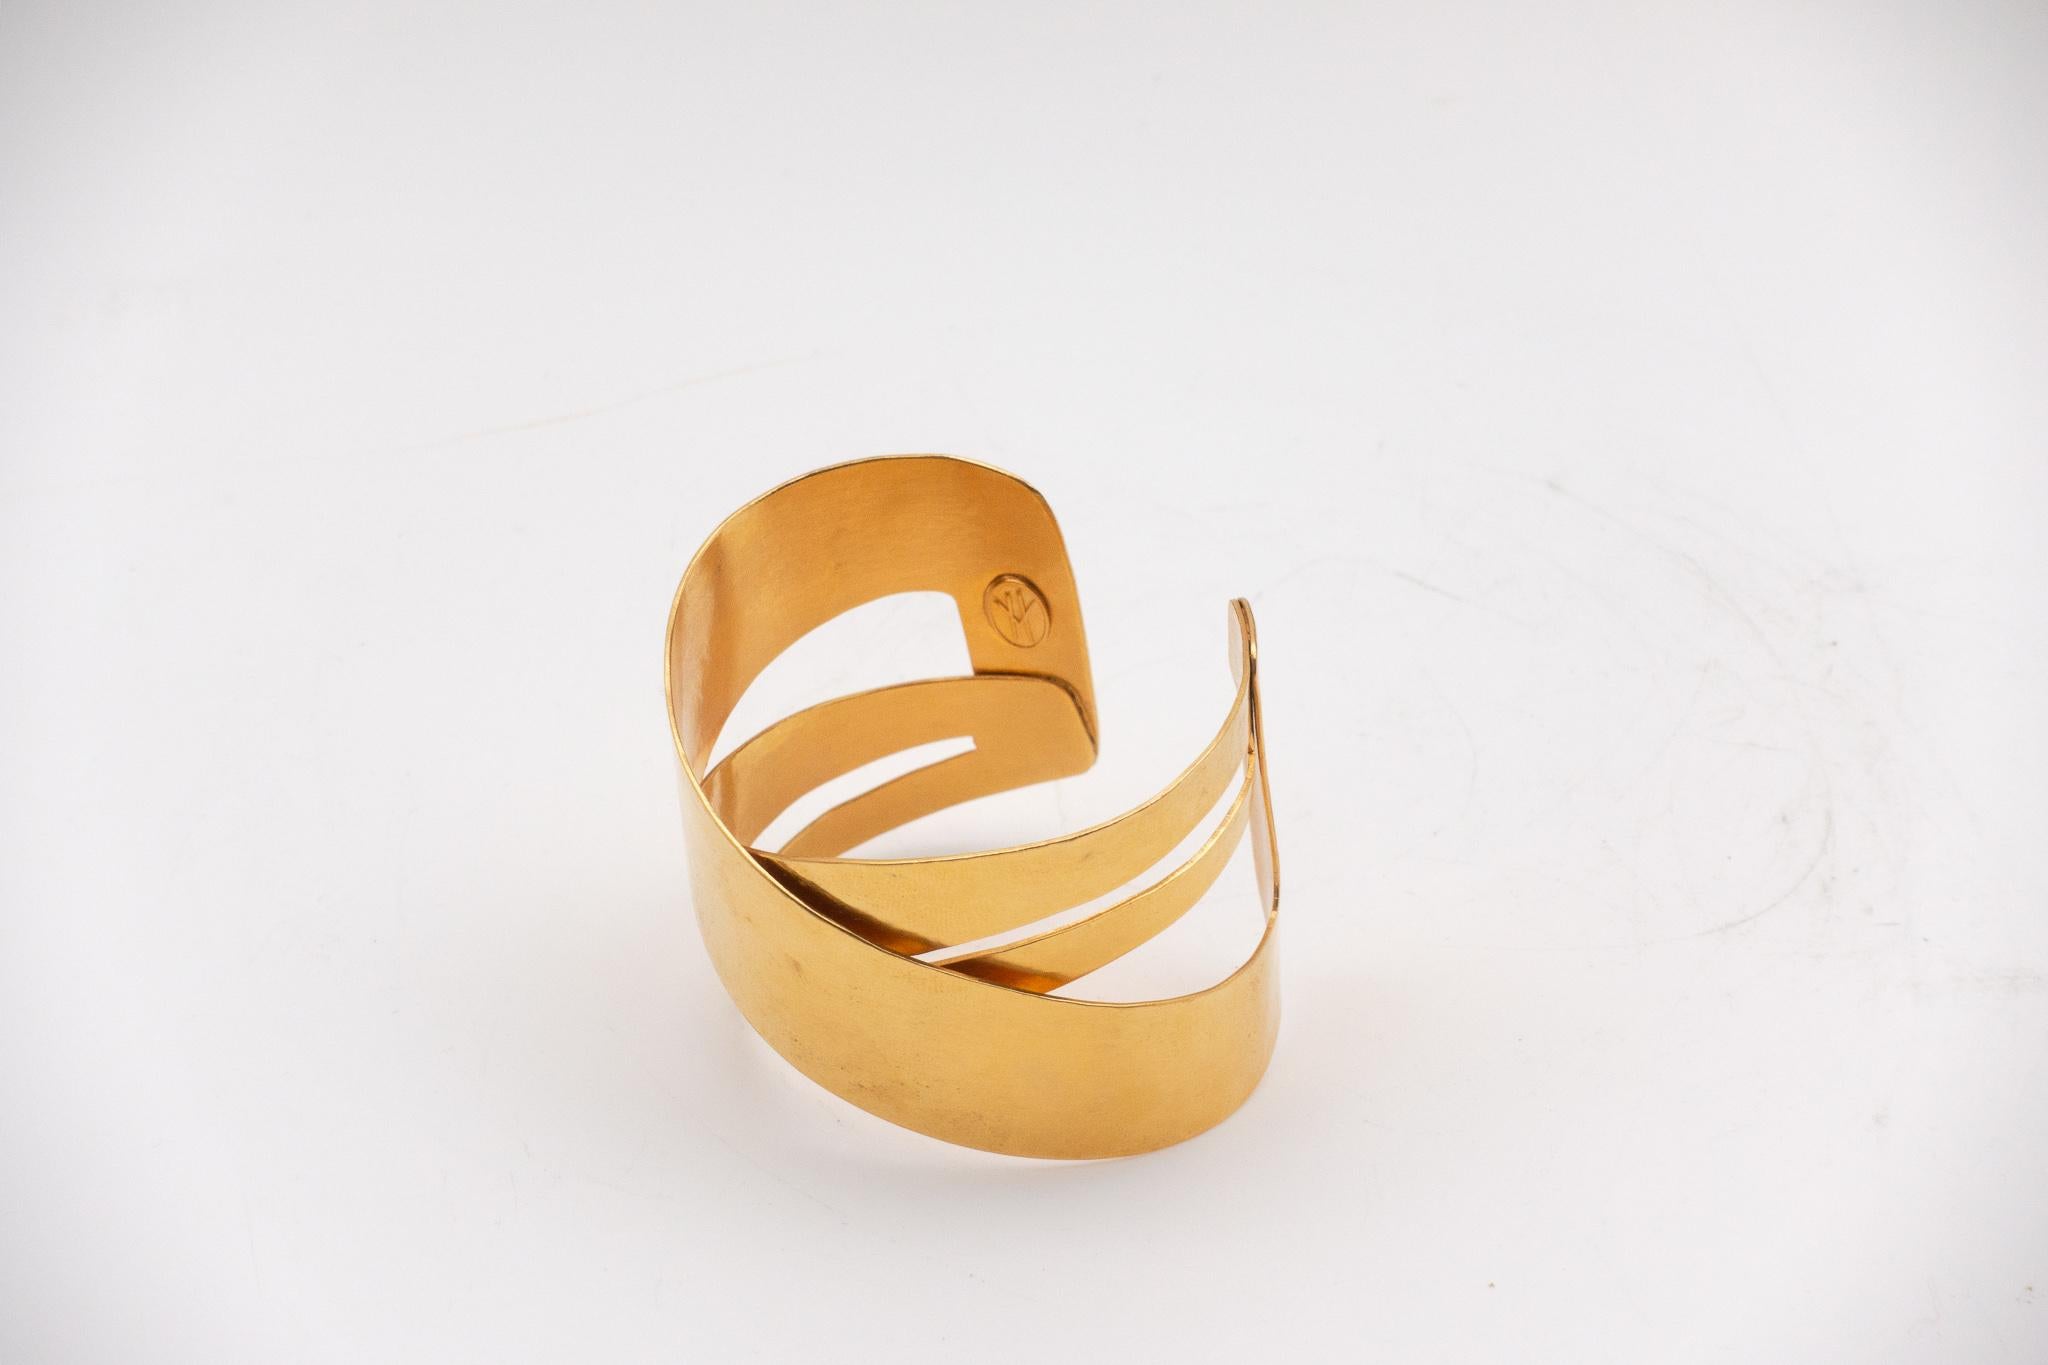 Highly collectable Hervé Van Der Straeten hammered gold plated brass bracelet. Hervé Van Der Straeten has discontinued making jewelry to focus more on his furniture line. His pieces have been collected the world over for decades. This is truly one